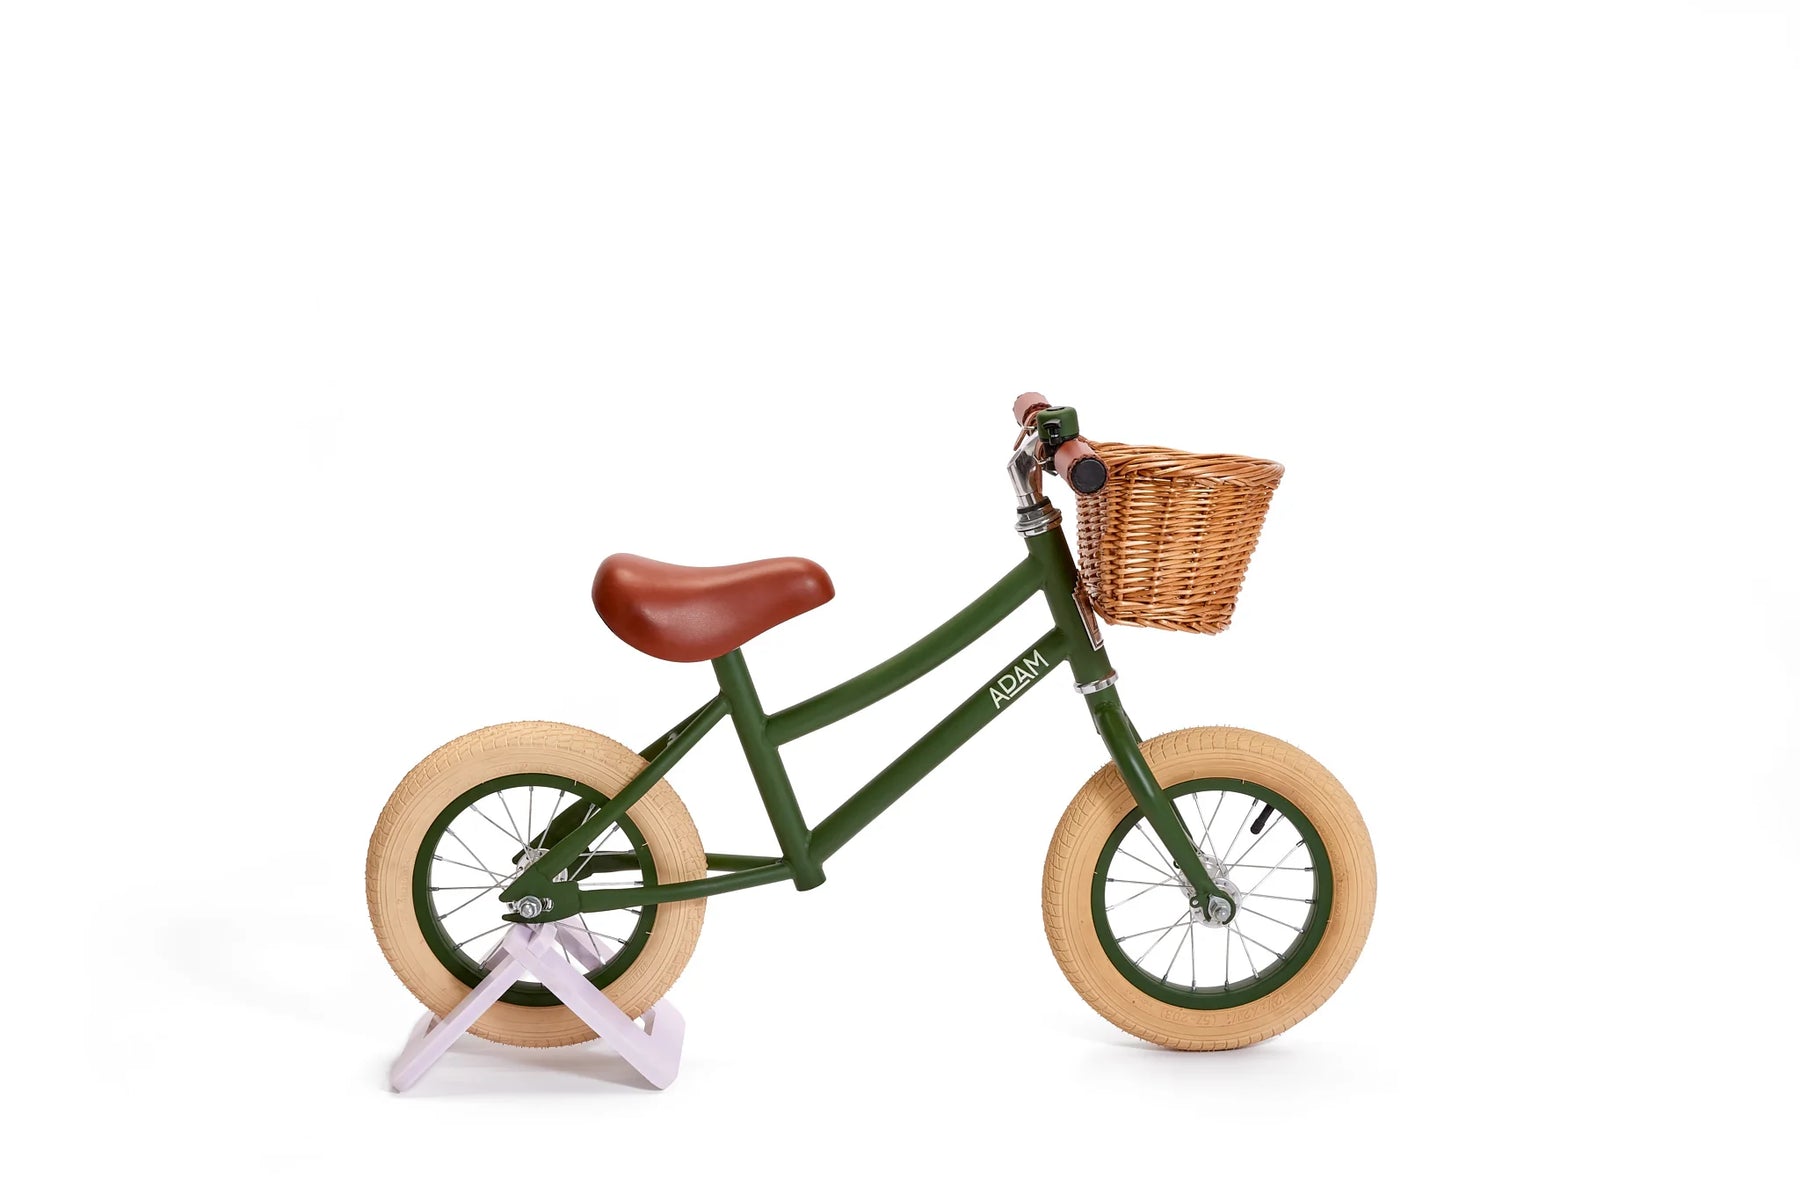 The Little Adam 12" - Balance bike for toddlers